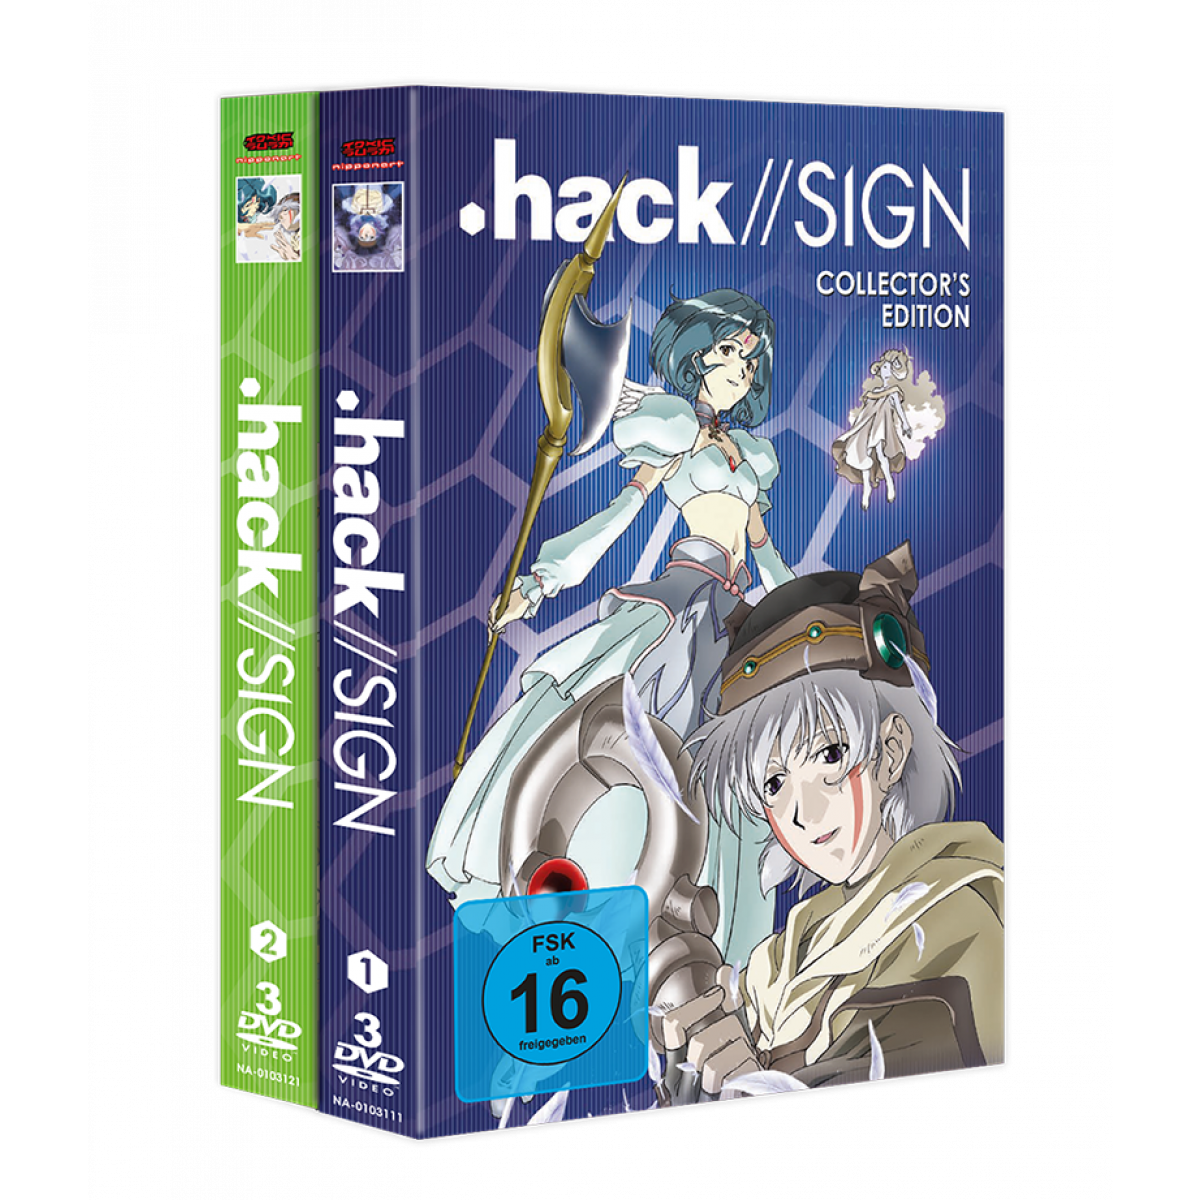 hack//Sign - Complete Series -- AVAILABLE NOW! 